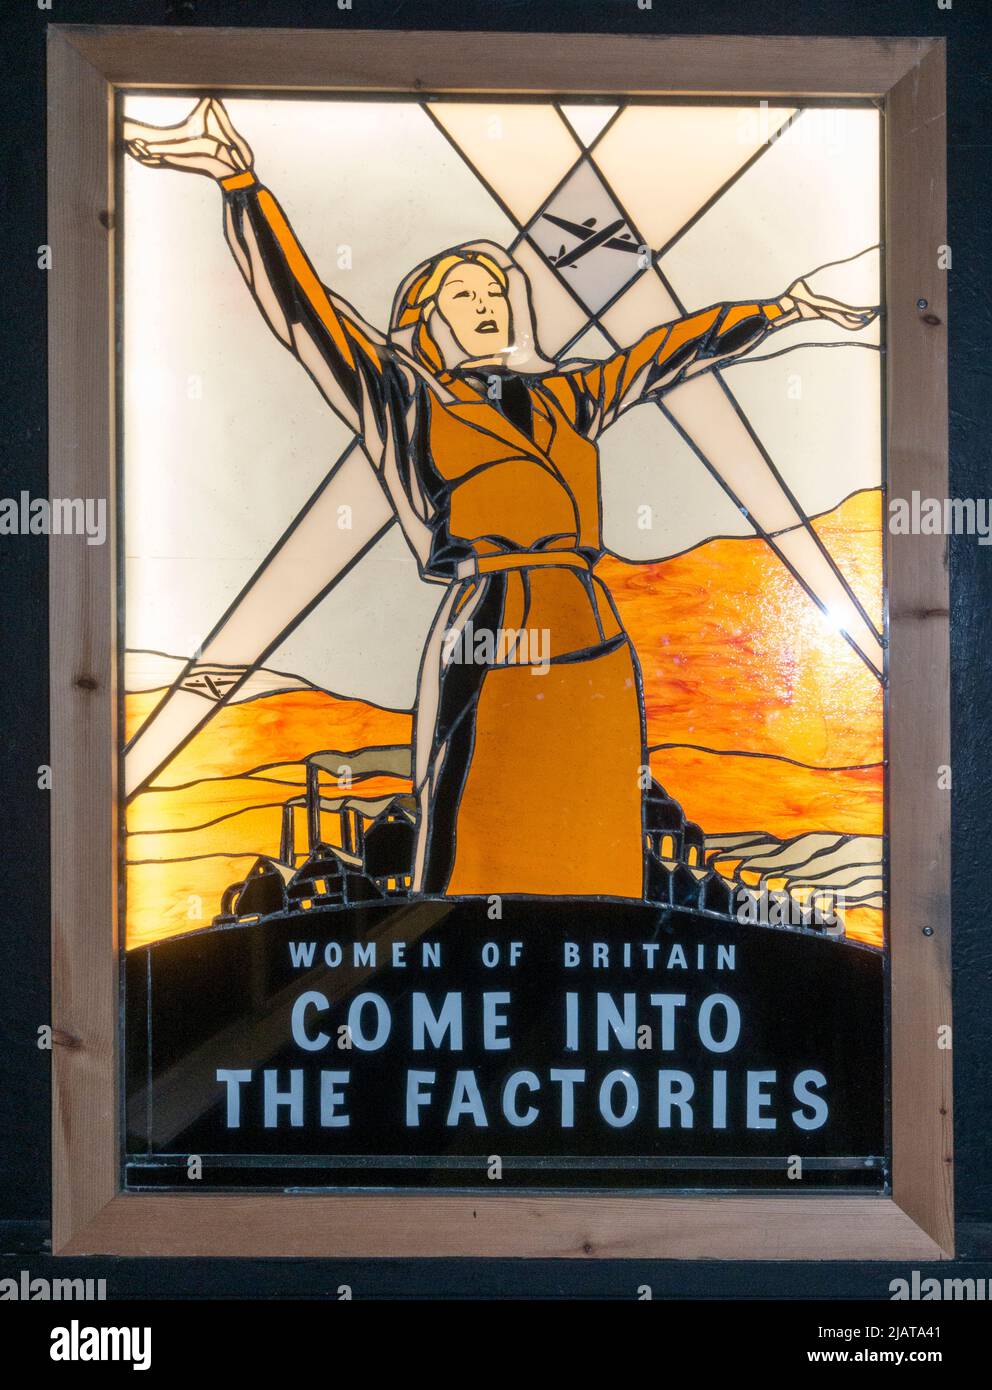 'Women of Britain Come Into the Factories' stained glass window in Eden Camp Modern History Theme Museum near Malton, North Yorkshire, England. Stock Photo